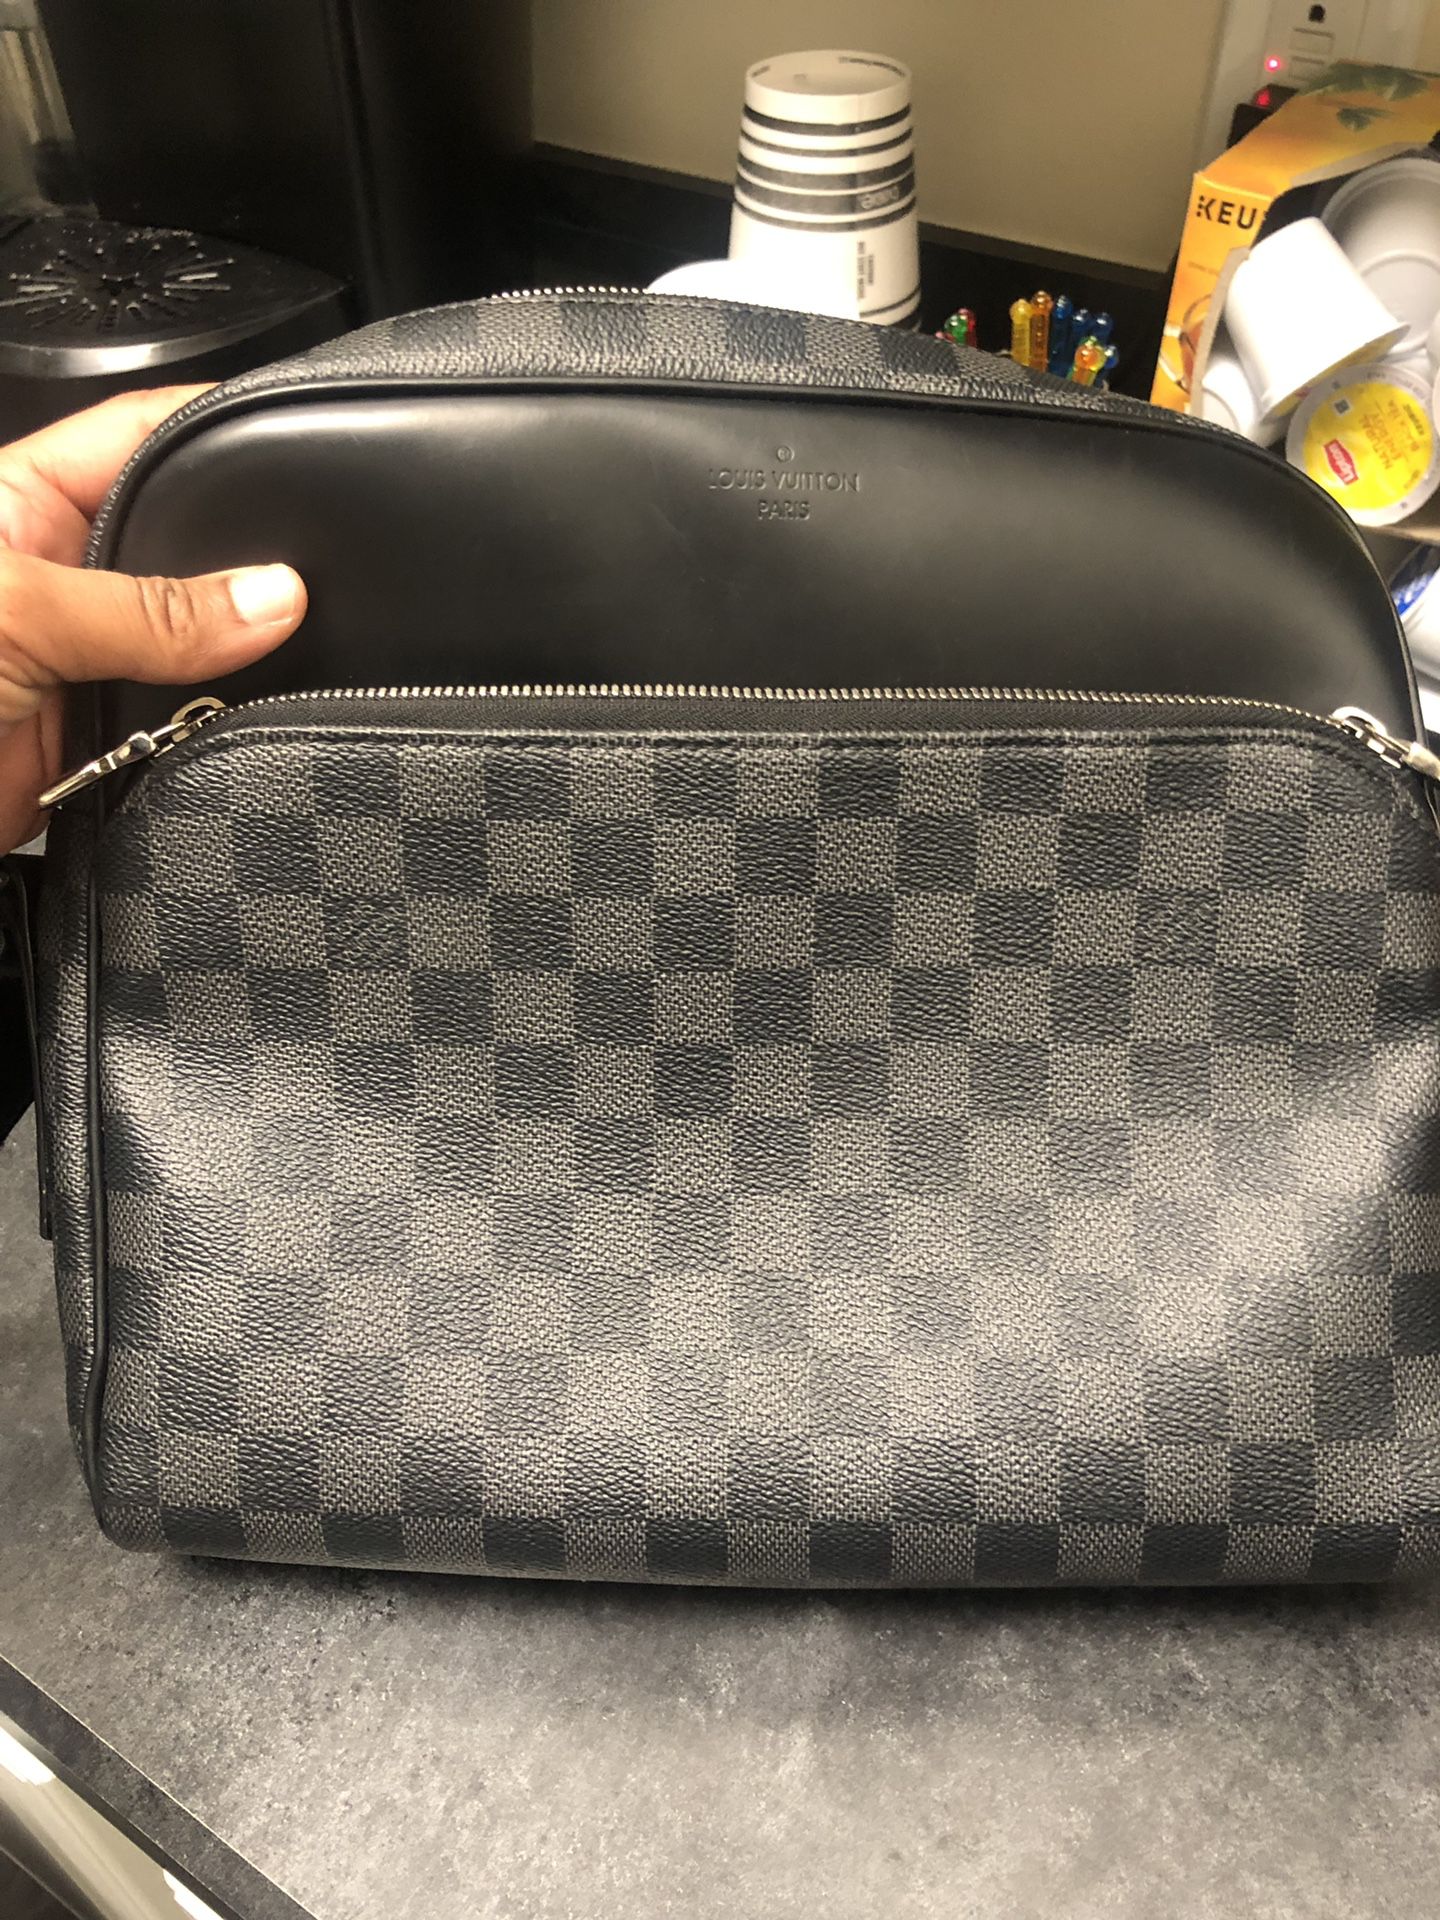 Louis Vuitton Hudson Gm Bag for Sale in No Huntingdon, PA - OfferUp